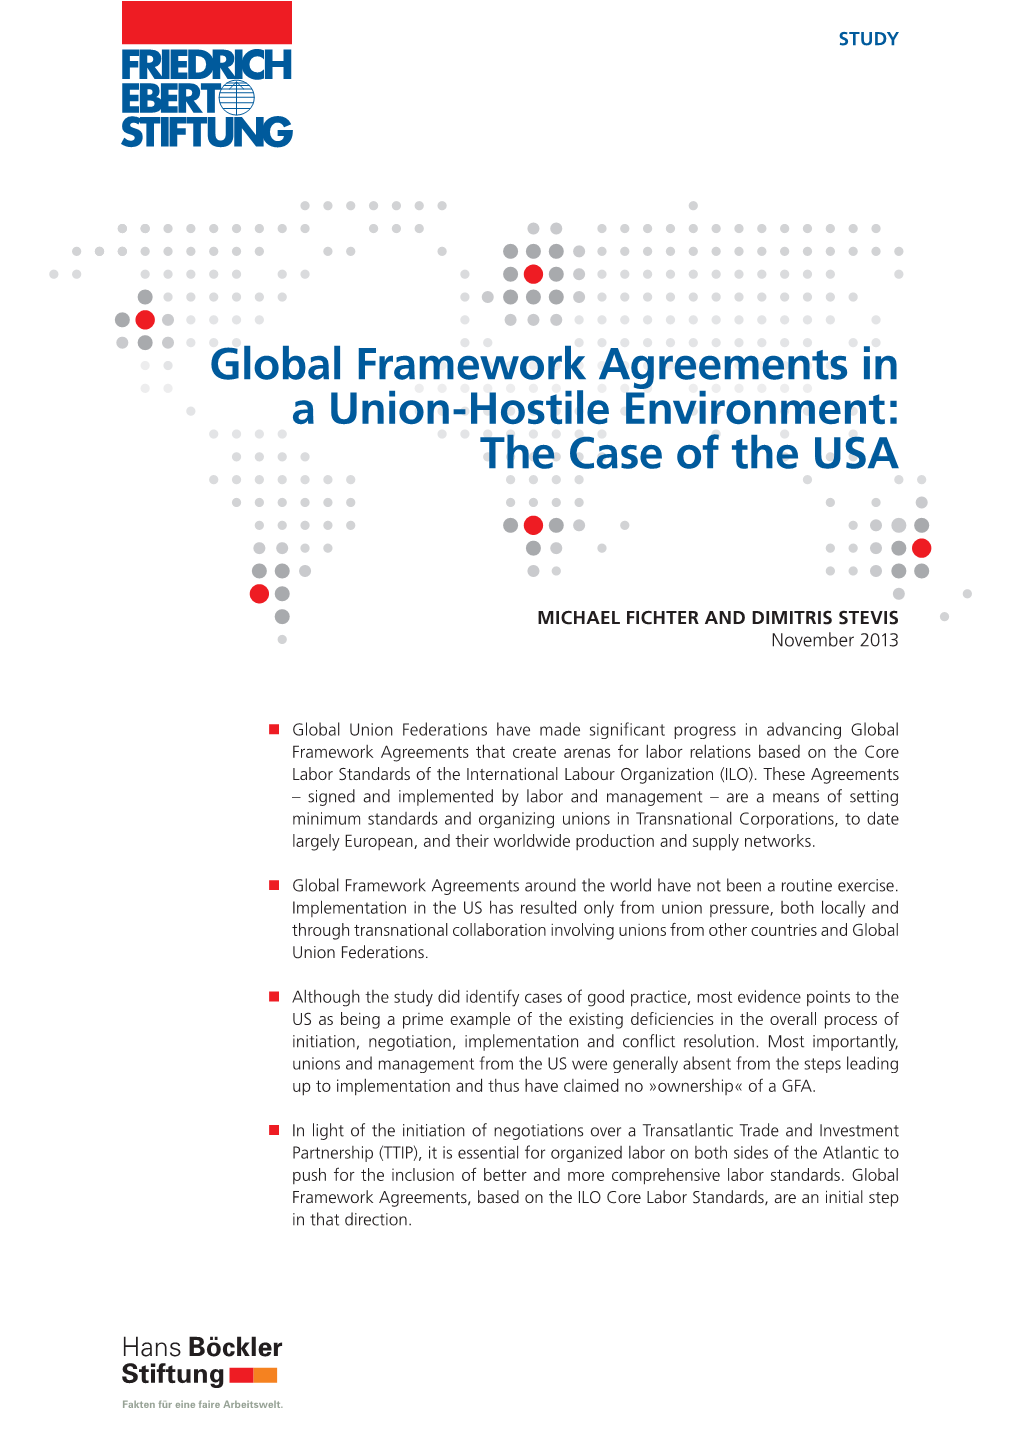 Global Framework Agreements in a Union-Hostile Environment : The